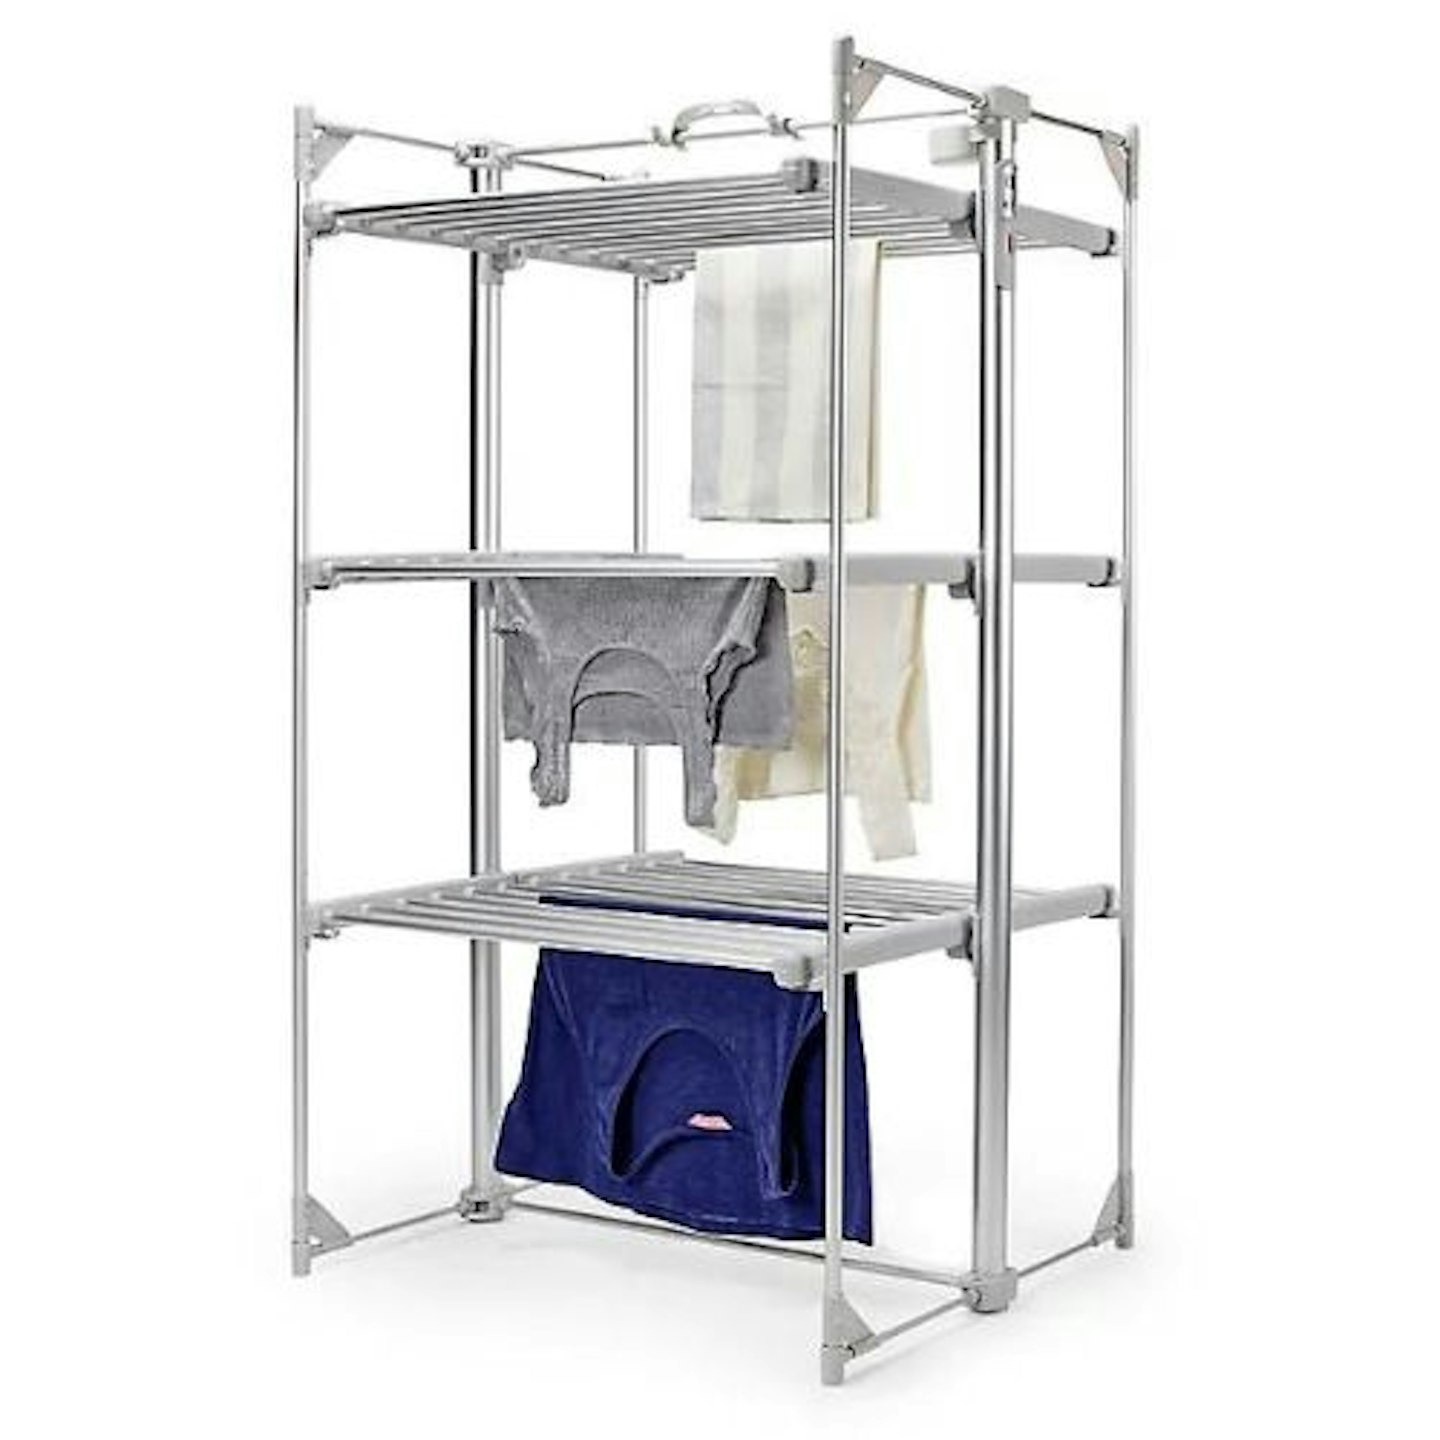 DrySoon Deluxe 3-Tier Heated Airer